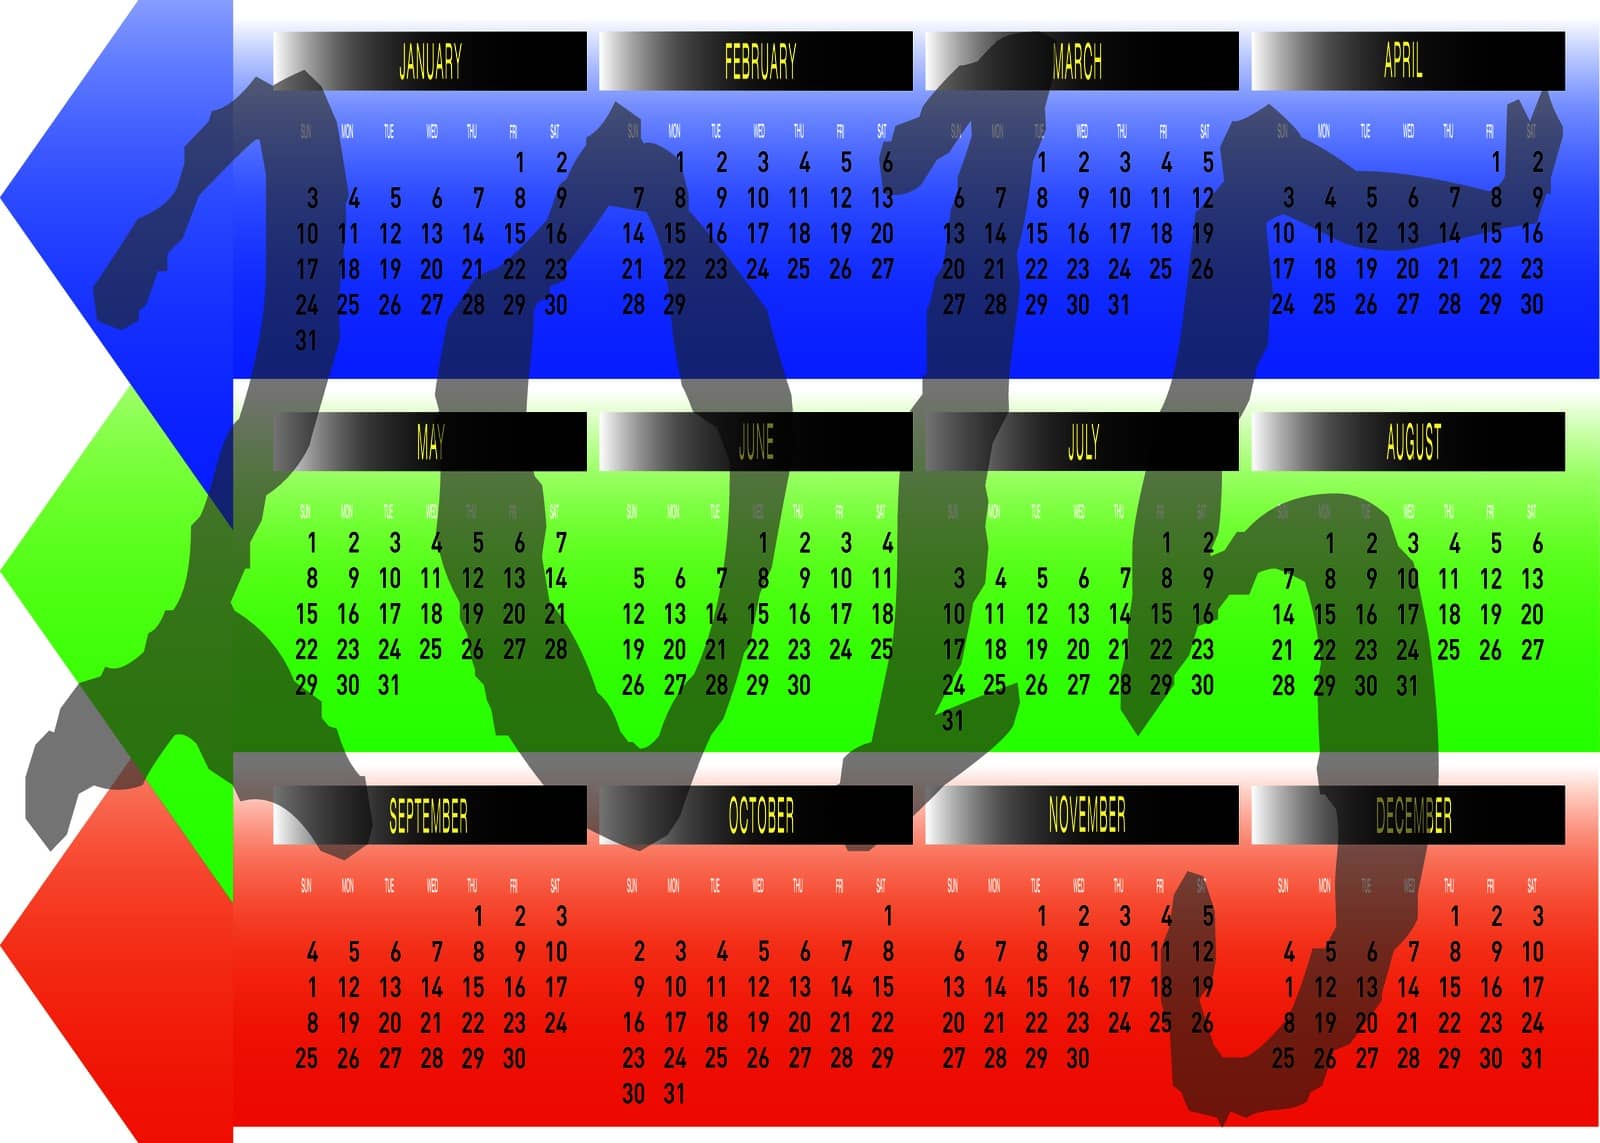 Daily Monthly Yearly 2015 Calendar Planning Chart by kobfujar